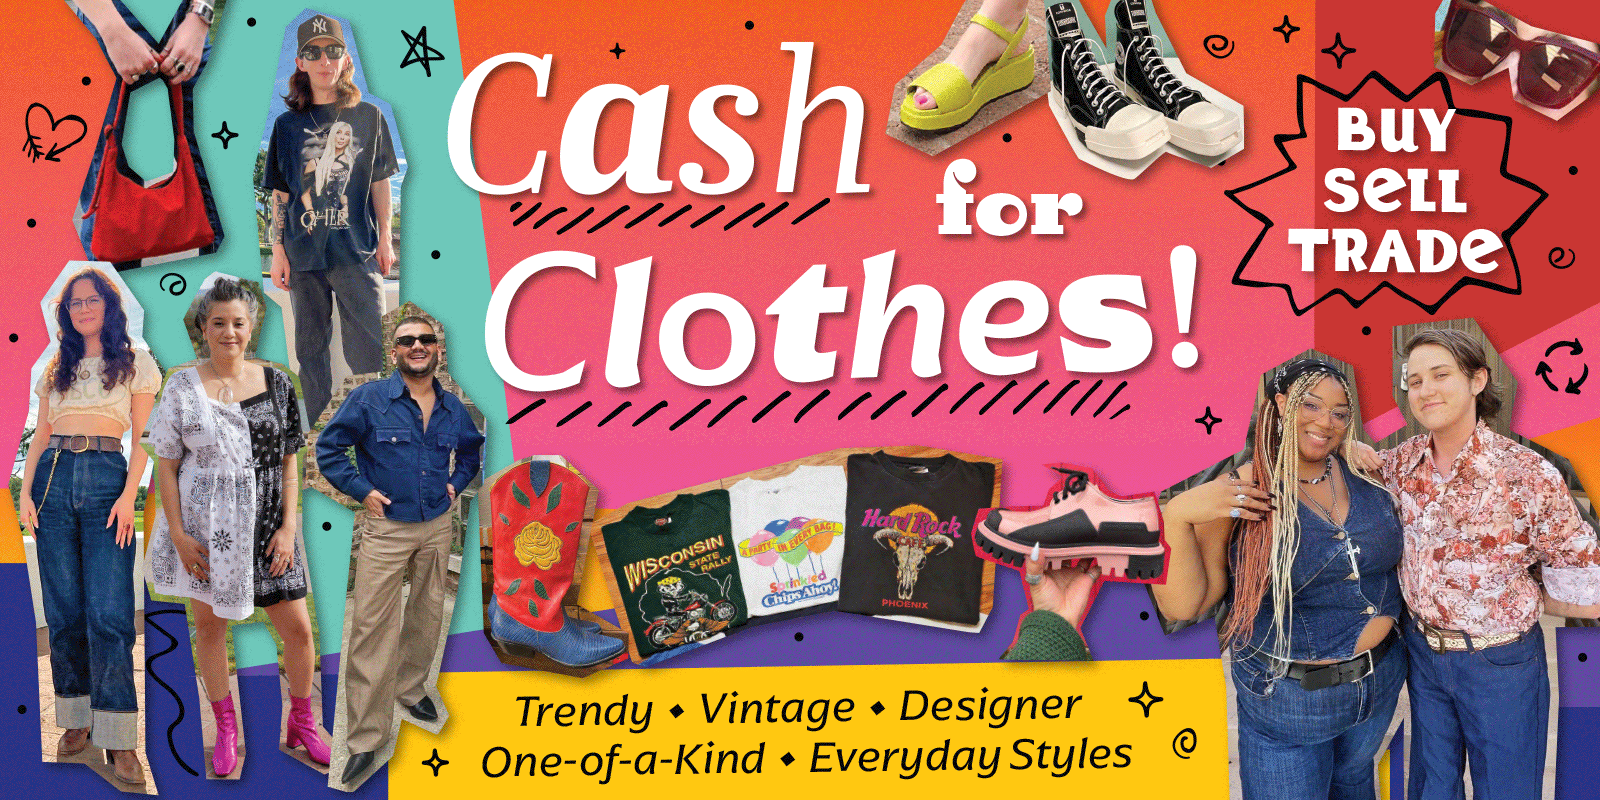 Cash for Clothes! Buy, Sell, Trade. We Buy All Day, Everyday! Trendy, Vintage, Designer, One-of-a-Kind, Everyday Styles [Colorful photo collage of styles we want]